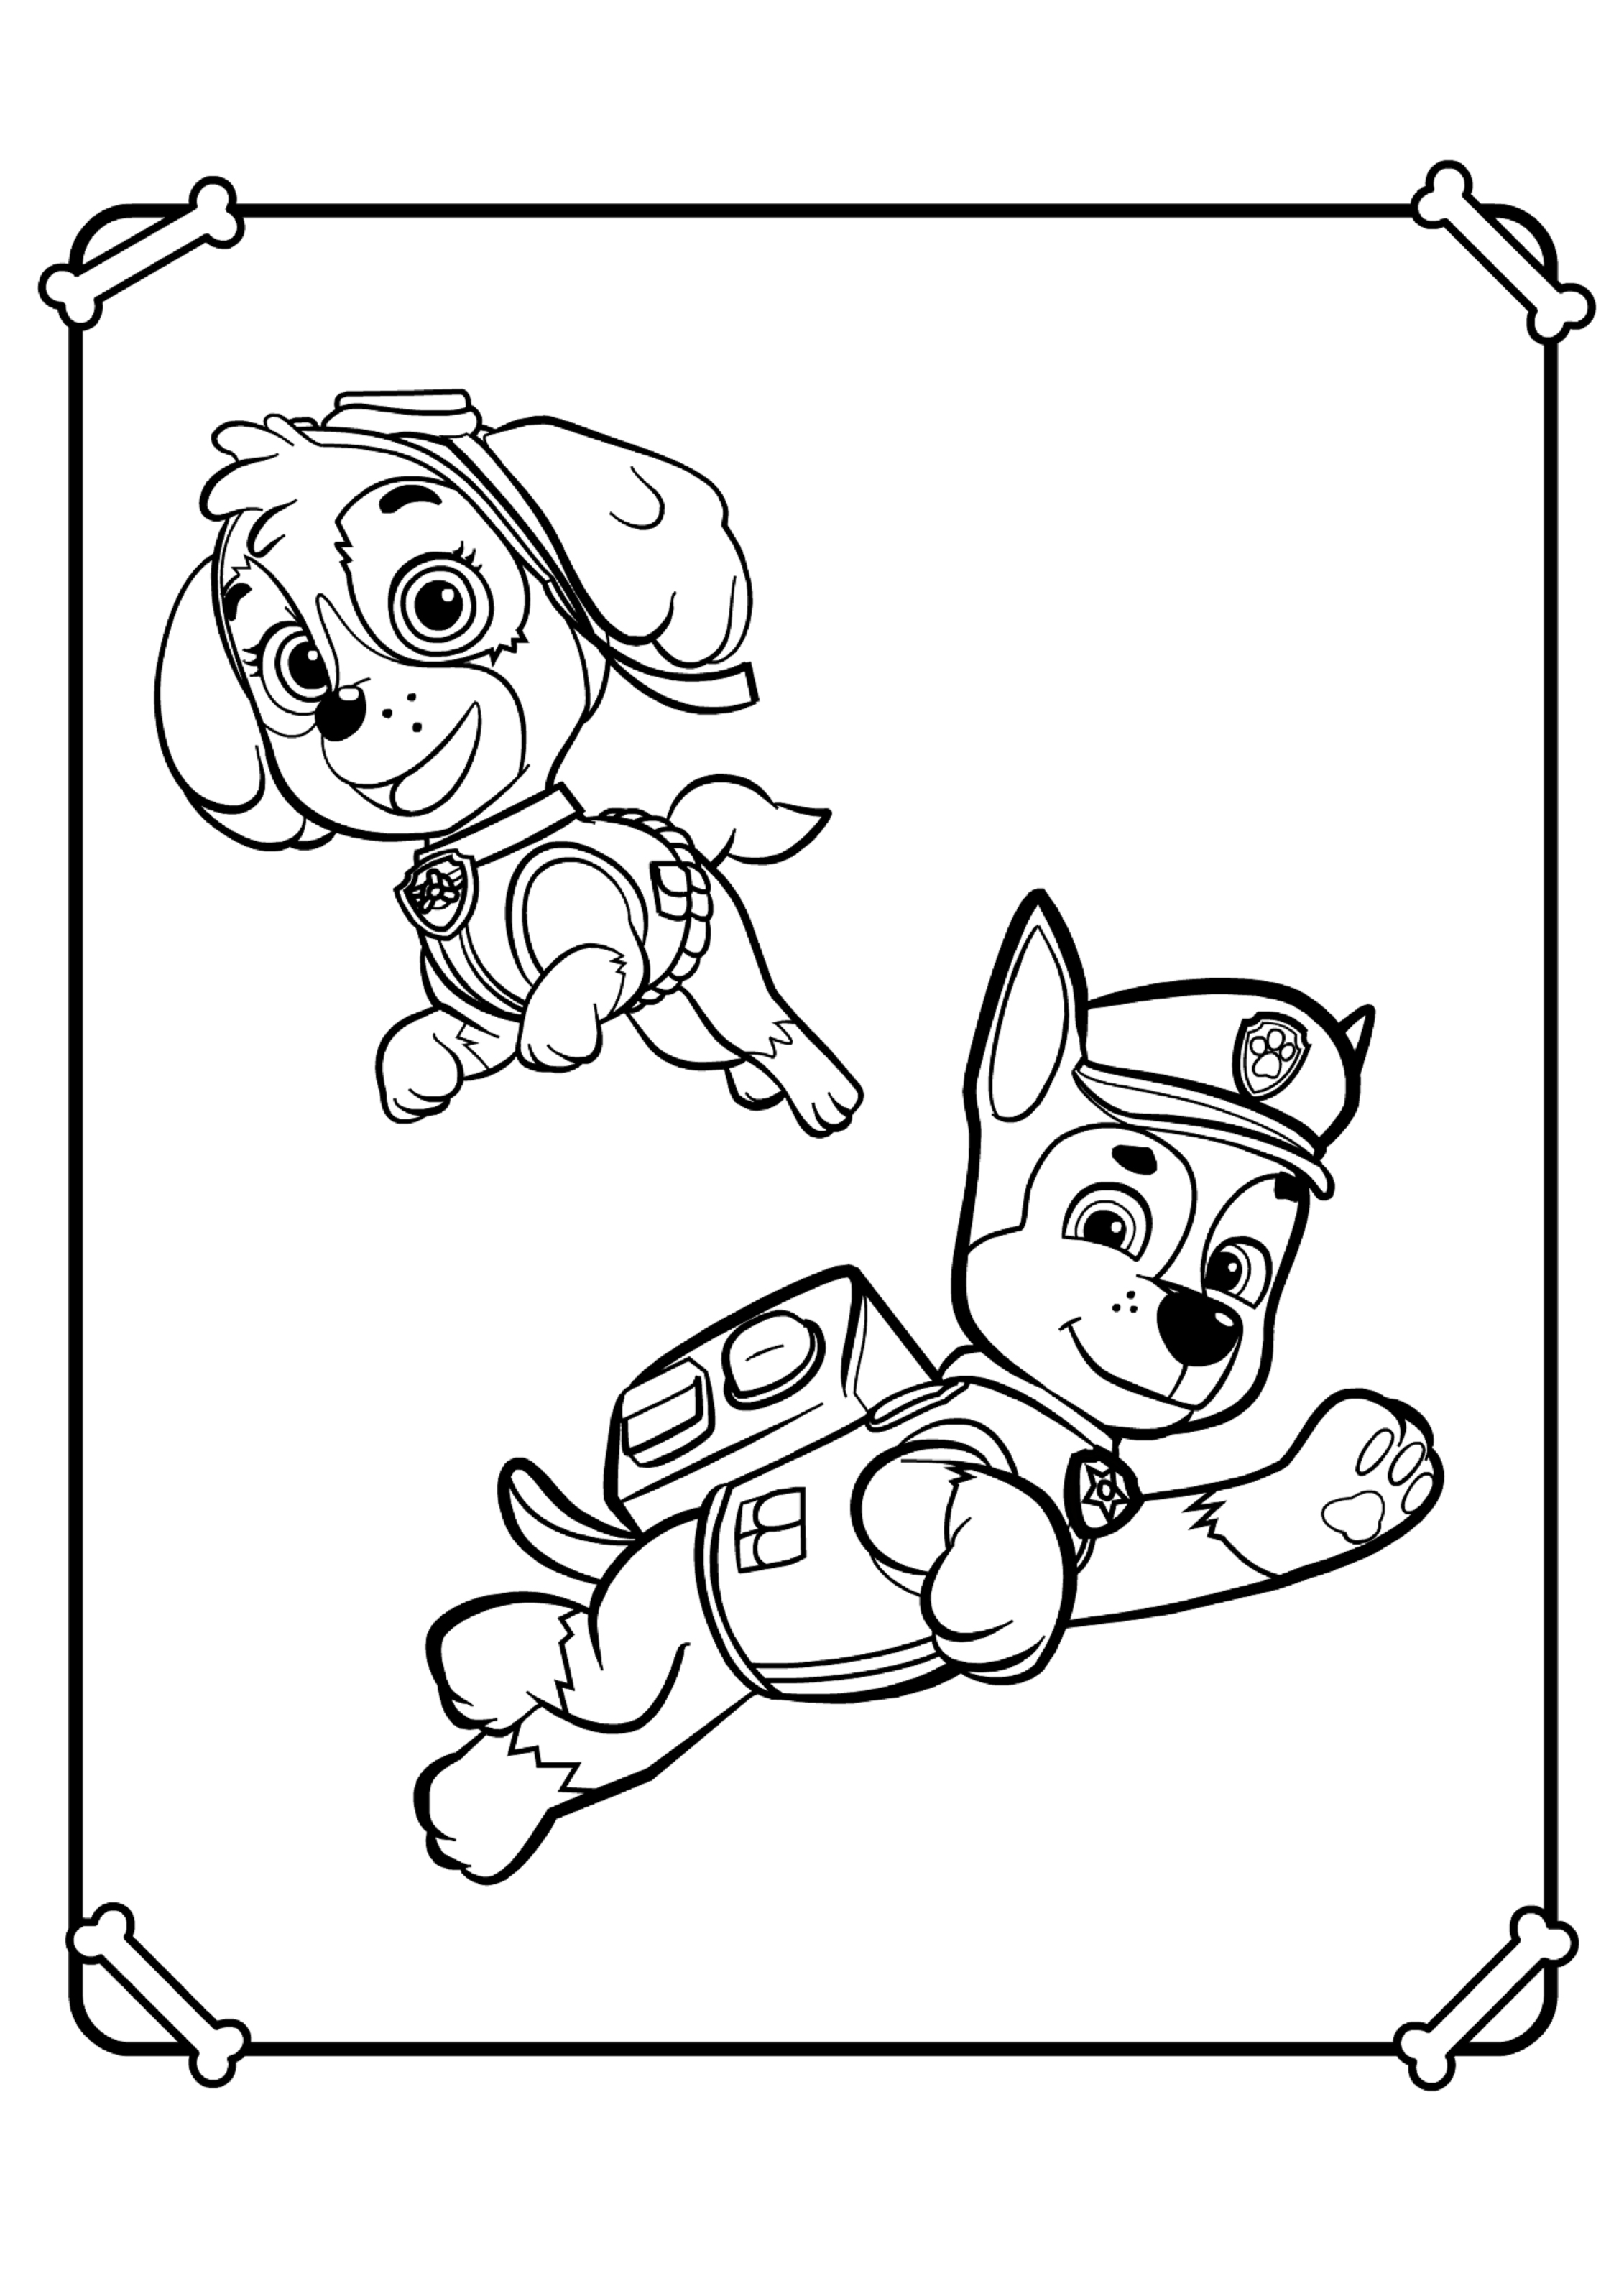 Chase Paw Patrol coloring pages to download and print for free